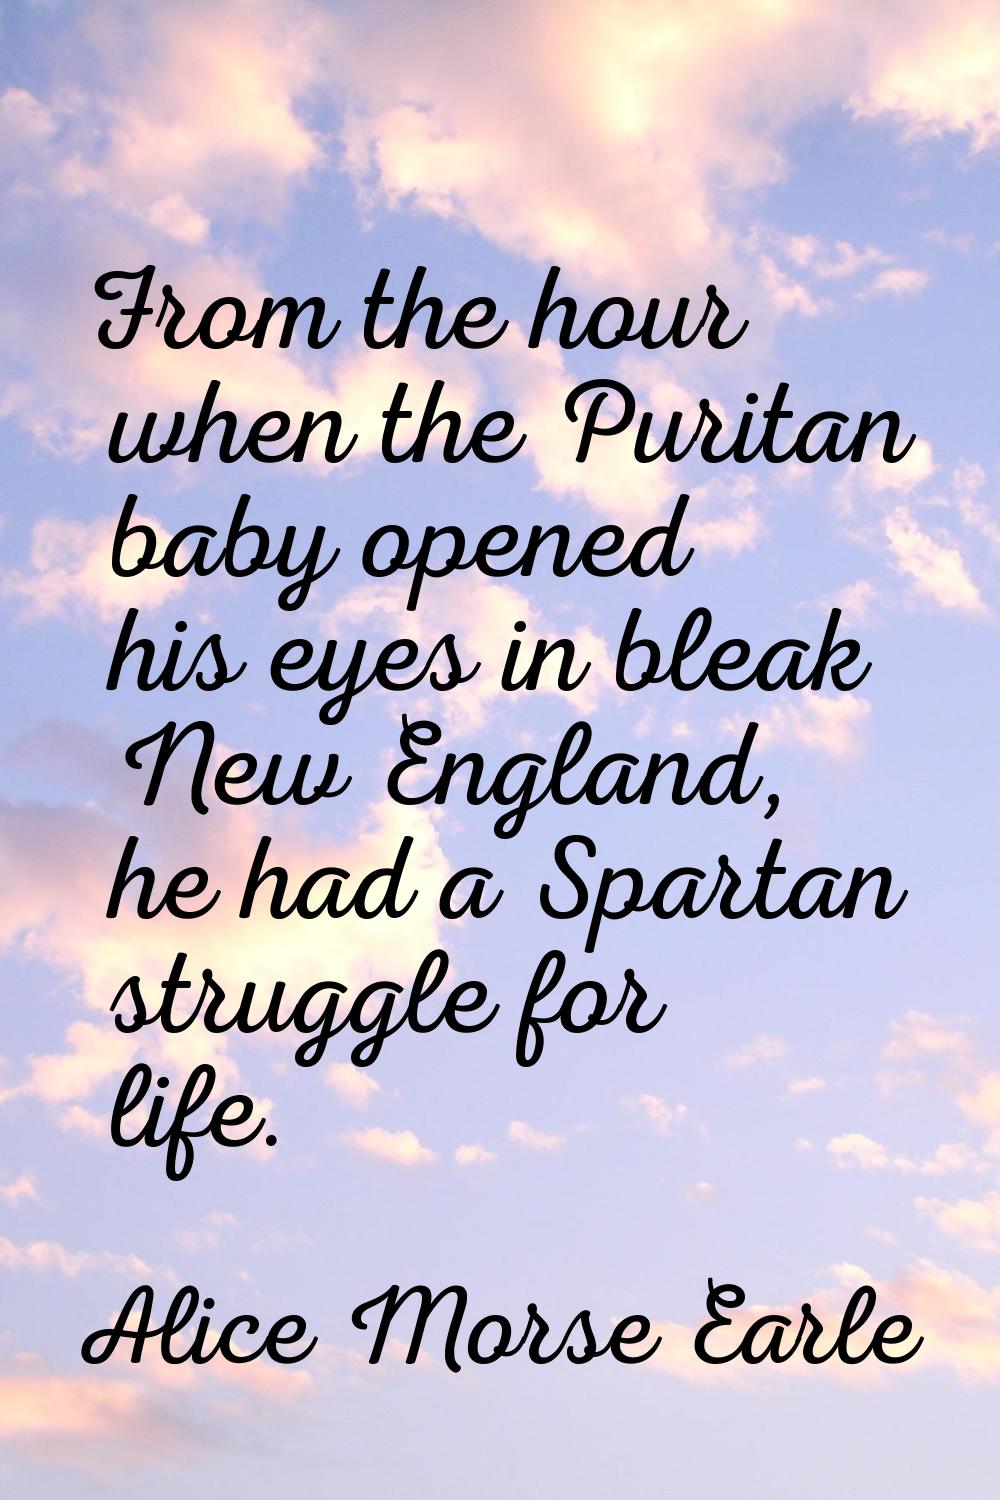 From the hour when the Puritan baby opened his eyes in bleak New England, he had a Spartan struggle